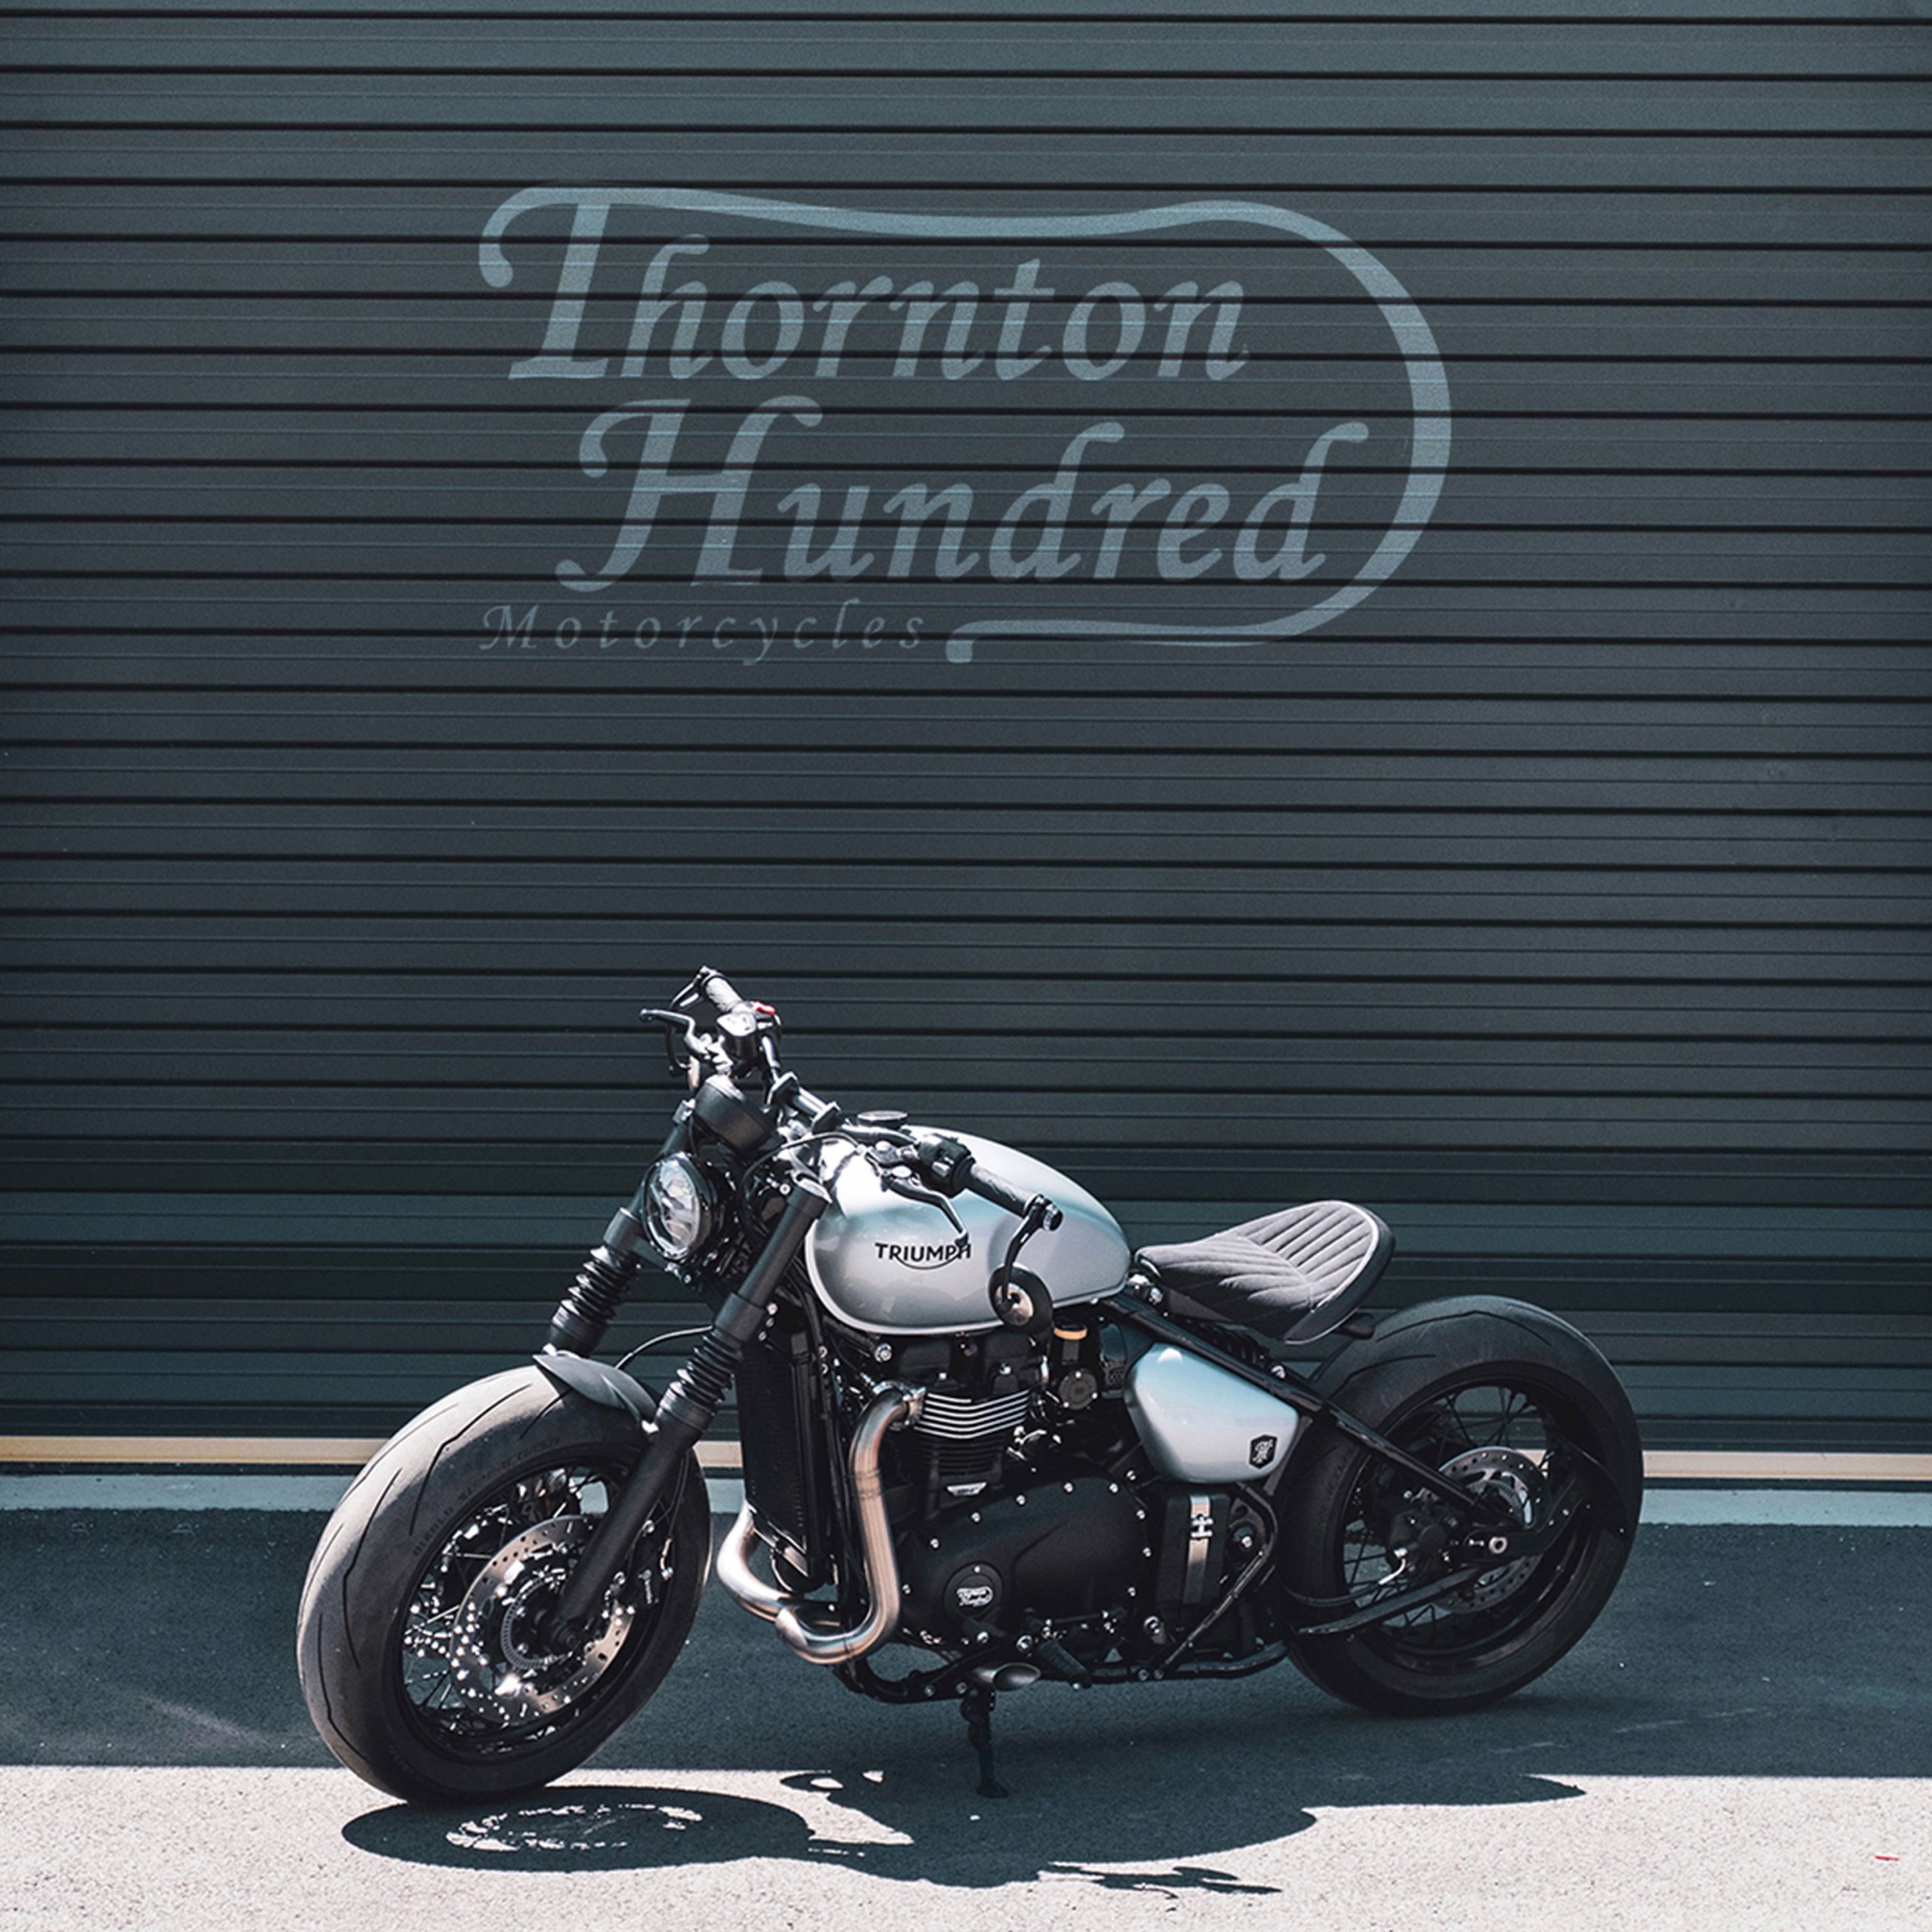 Free Mobile Wallpaper Download Pack 2 - Thornton Hundred Motorcycles